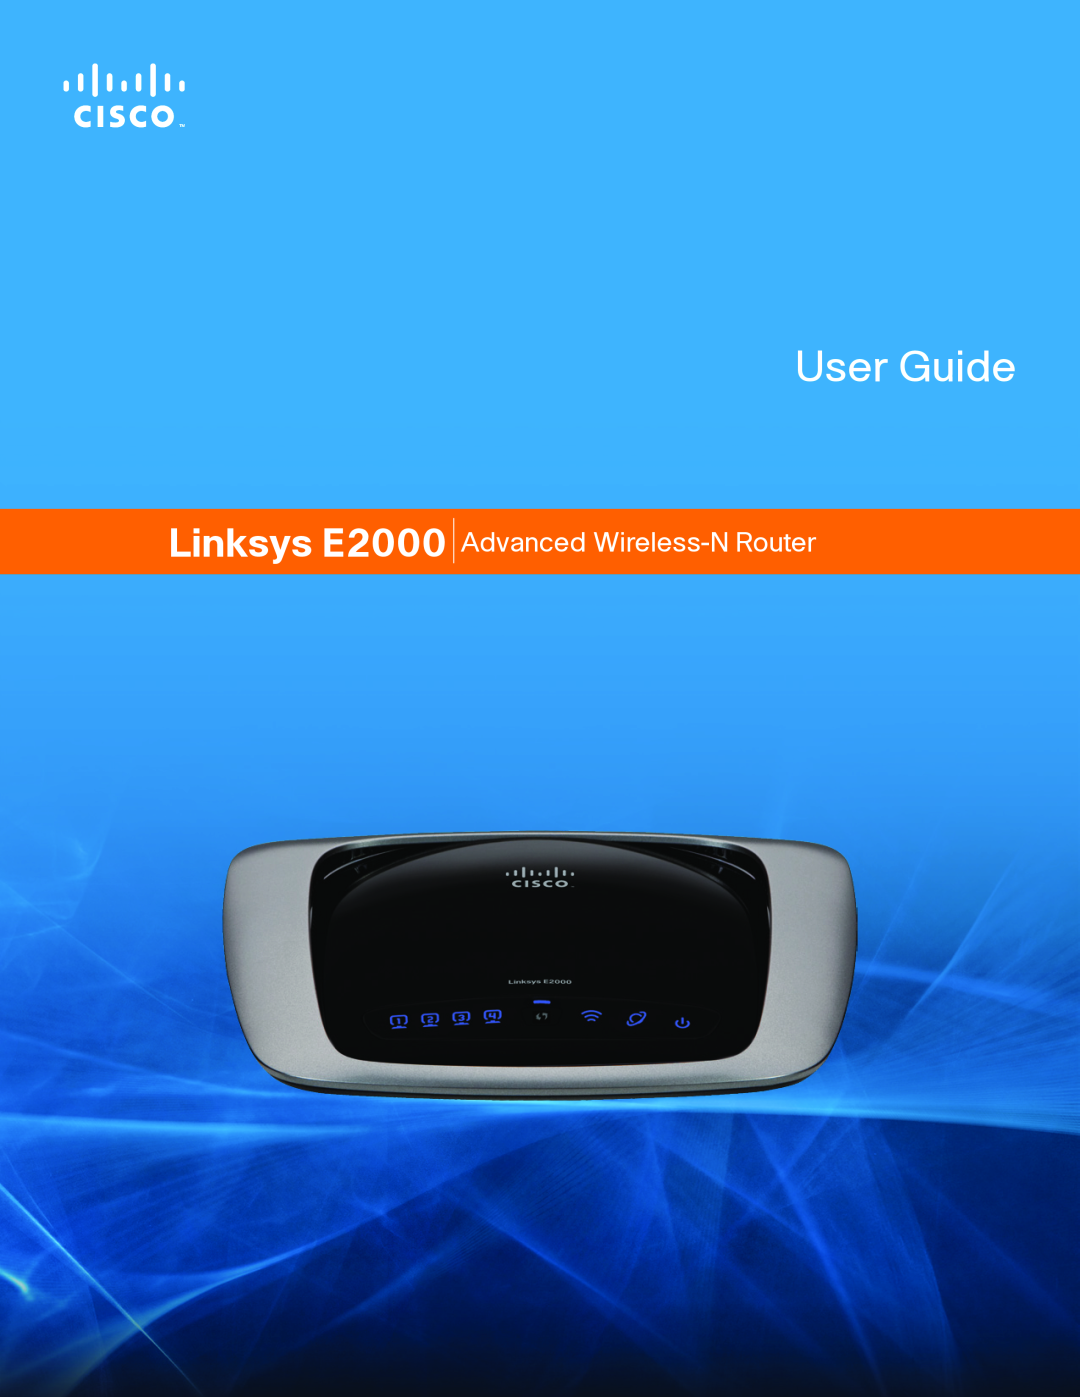 Cisco Systems manual User Guide, Linksys E2000, Advanced Wireless-N Router 